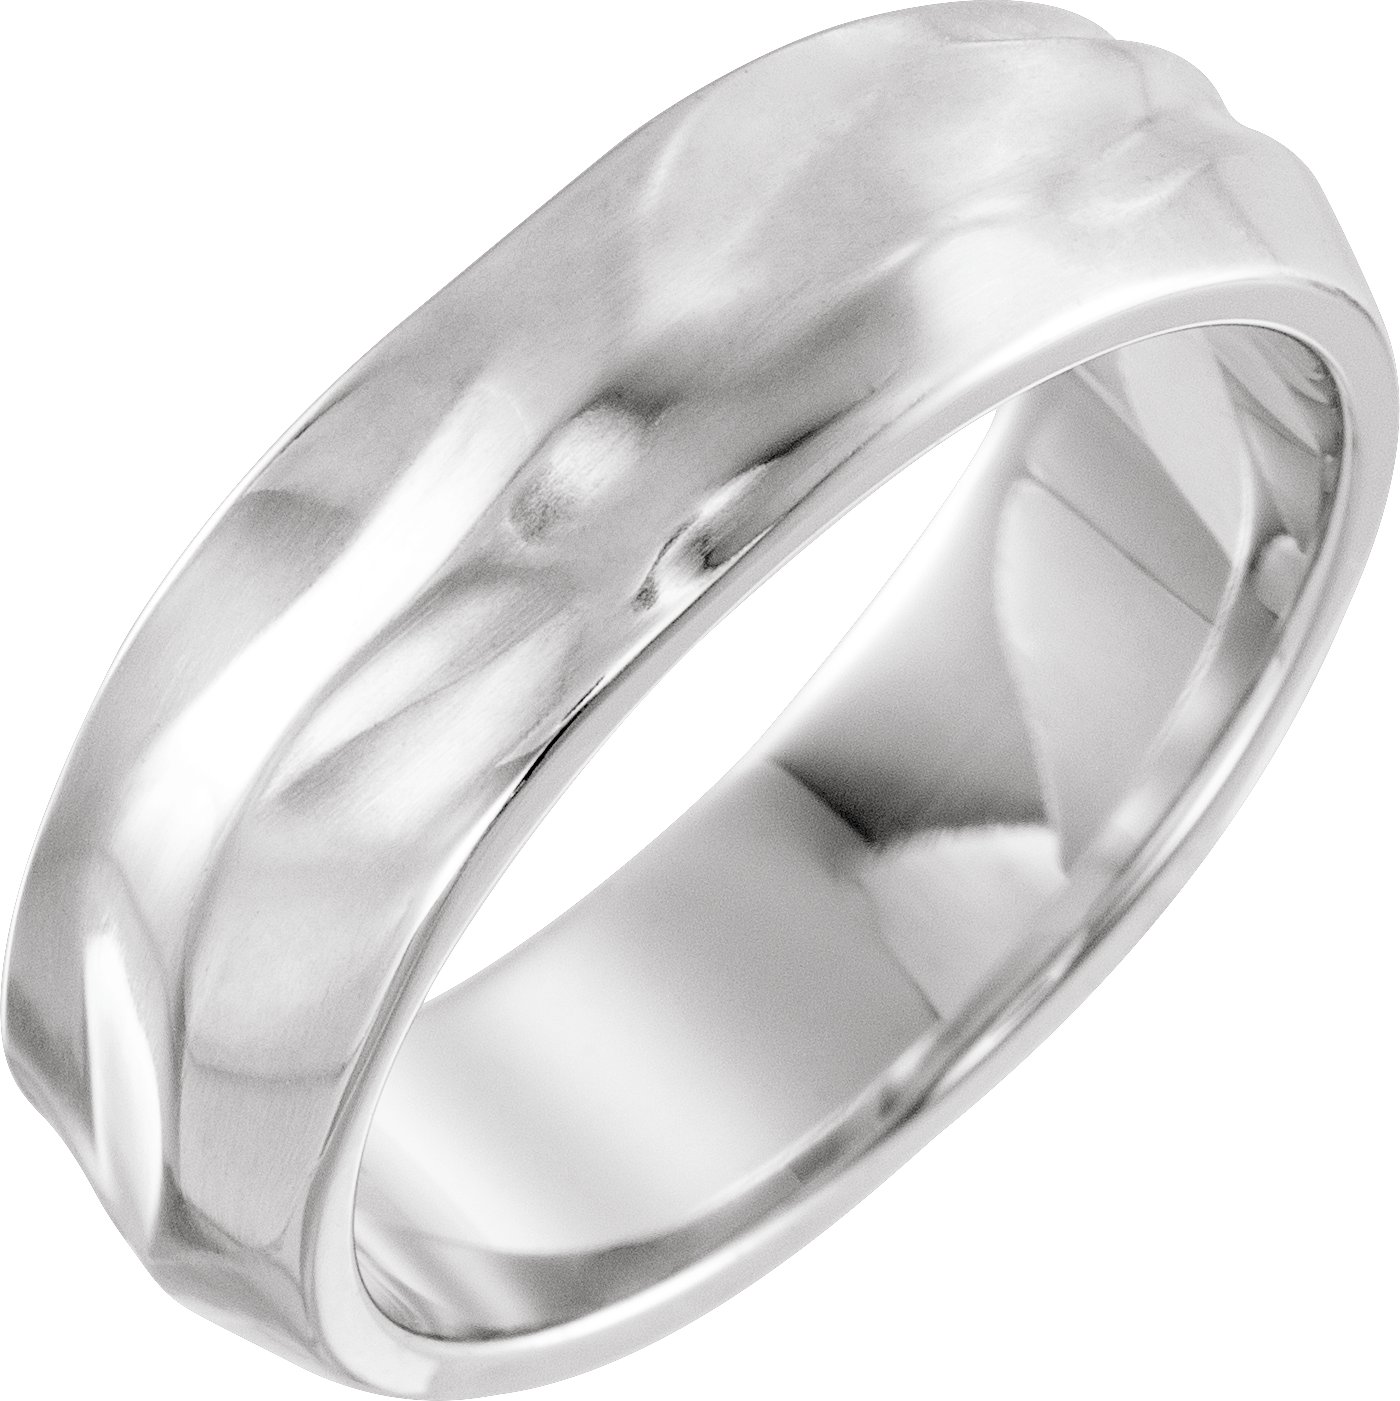 Sterling Silver 6 mm Textured Band Size 7